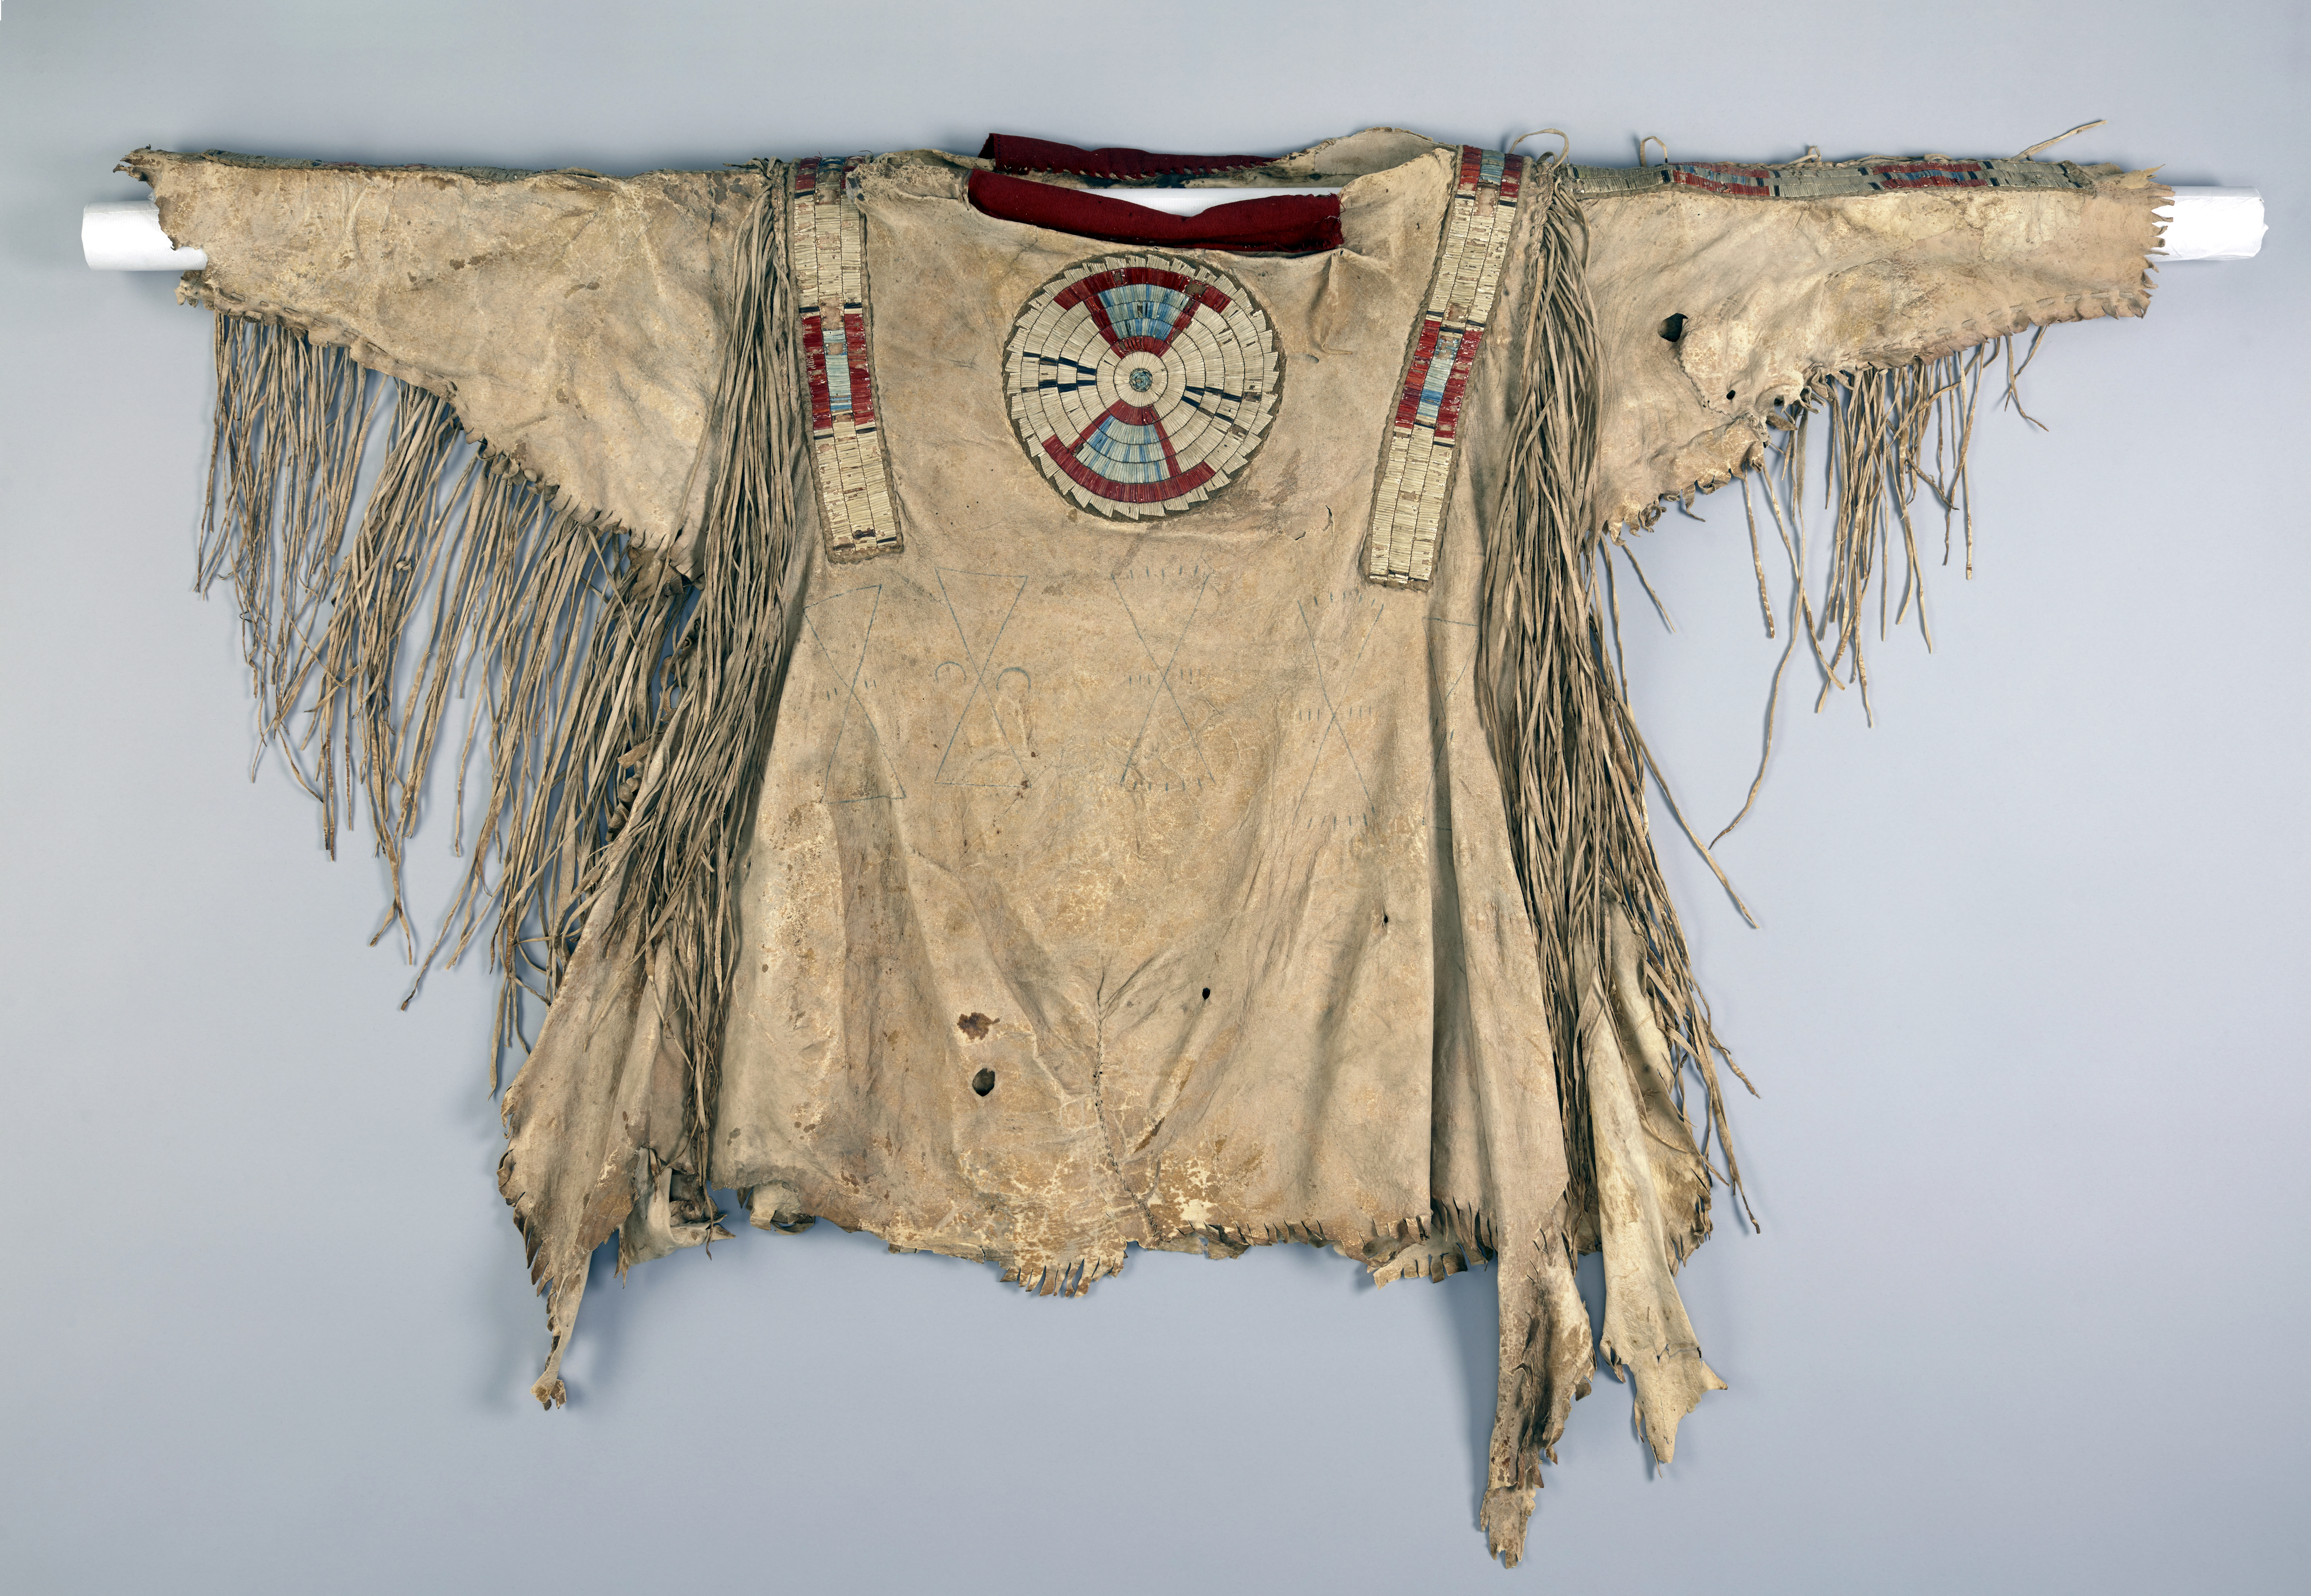 Quilled war shirt (front), c. 1800-1820. Native tanned hide, porcupine quills, red trade cloth, dyes, and sinew. 34 x 43 in. (Denver Art Museum)